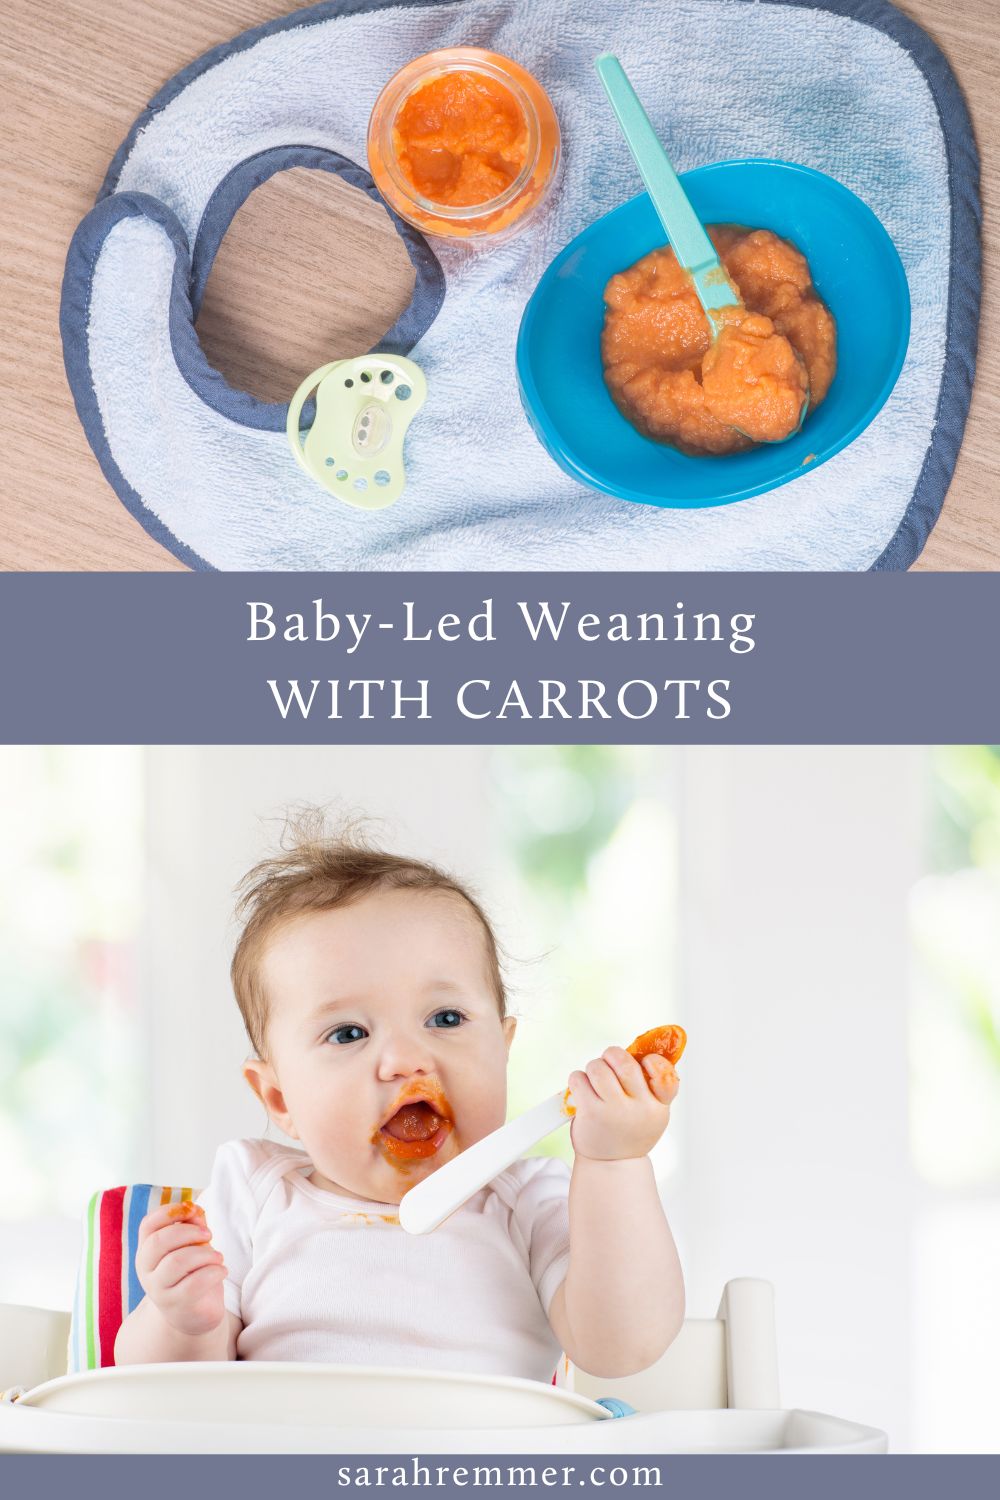 If you’re wondering how and when to introduce carrots to your baby, you’re in the right spot! Here is everything you need to know about baby-led weaning with carrots.